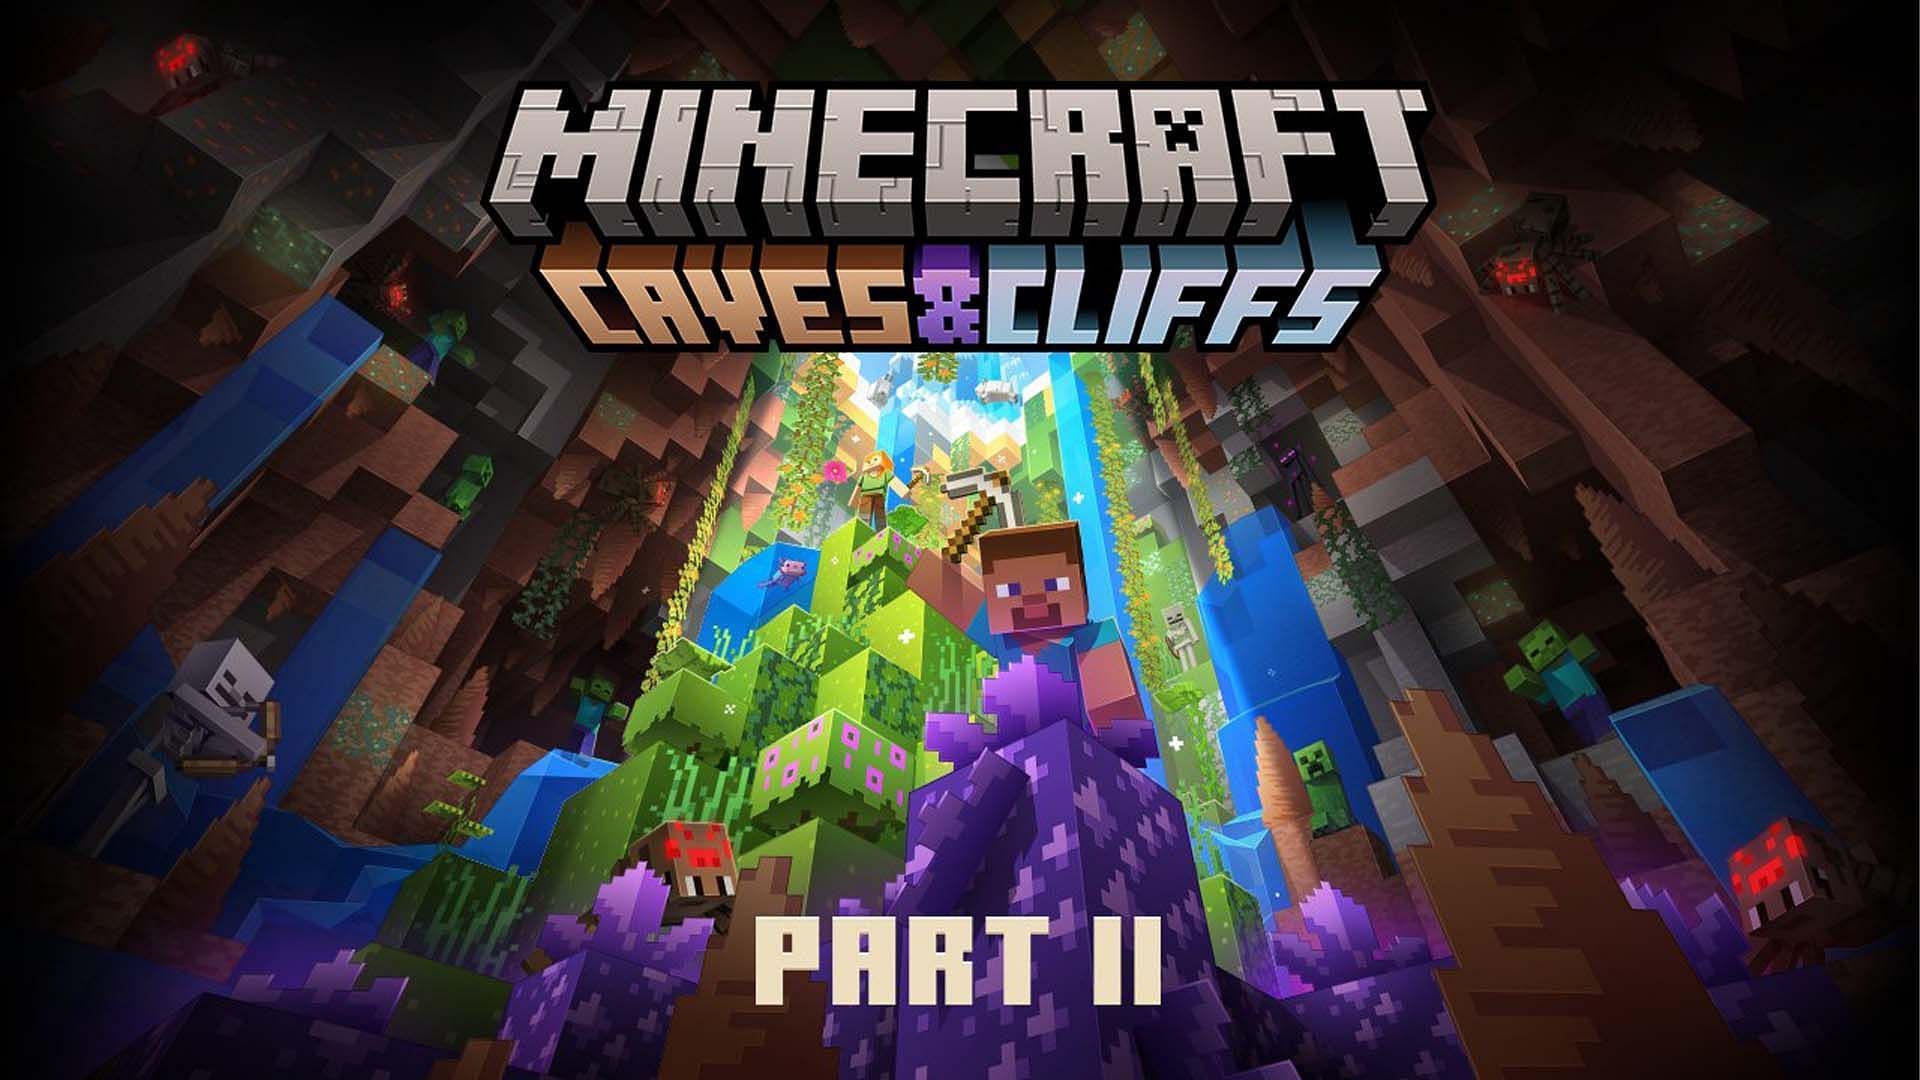 Caves &amp; Cliffs Part II is the most recent major content update until The Wild Update (Image via Mojang)